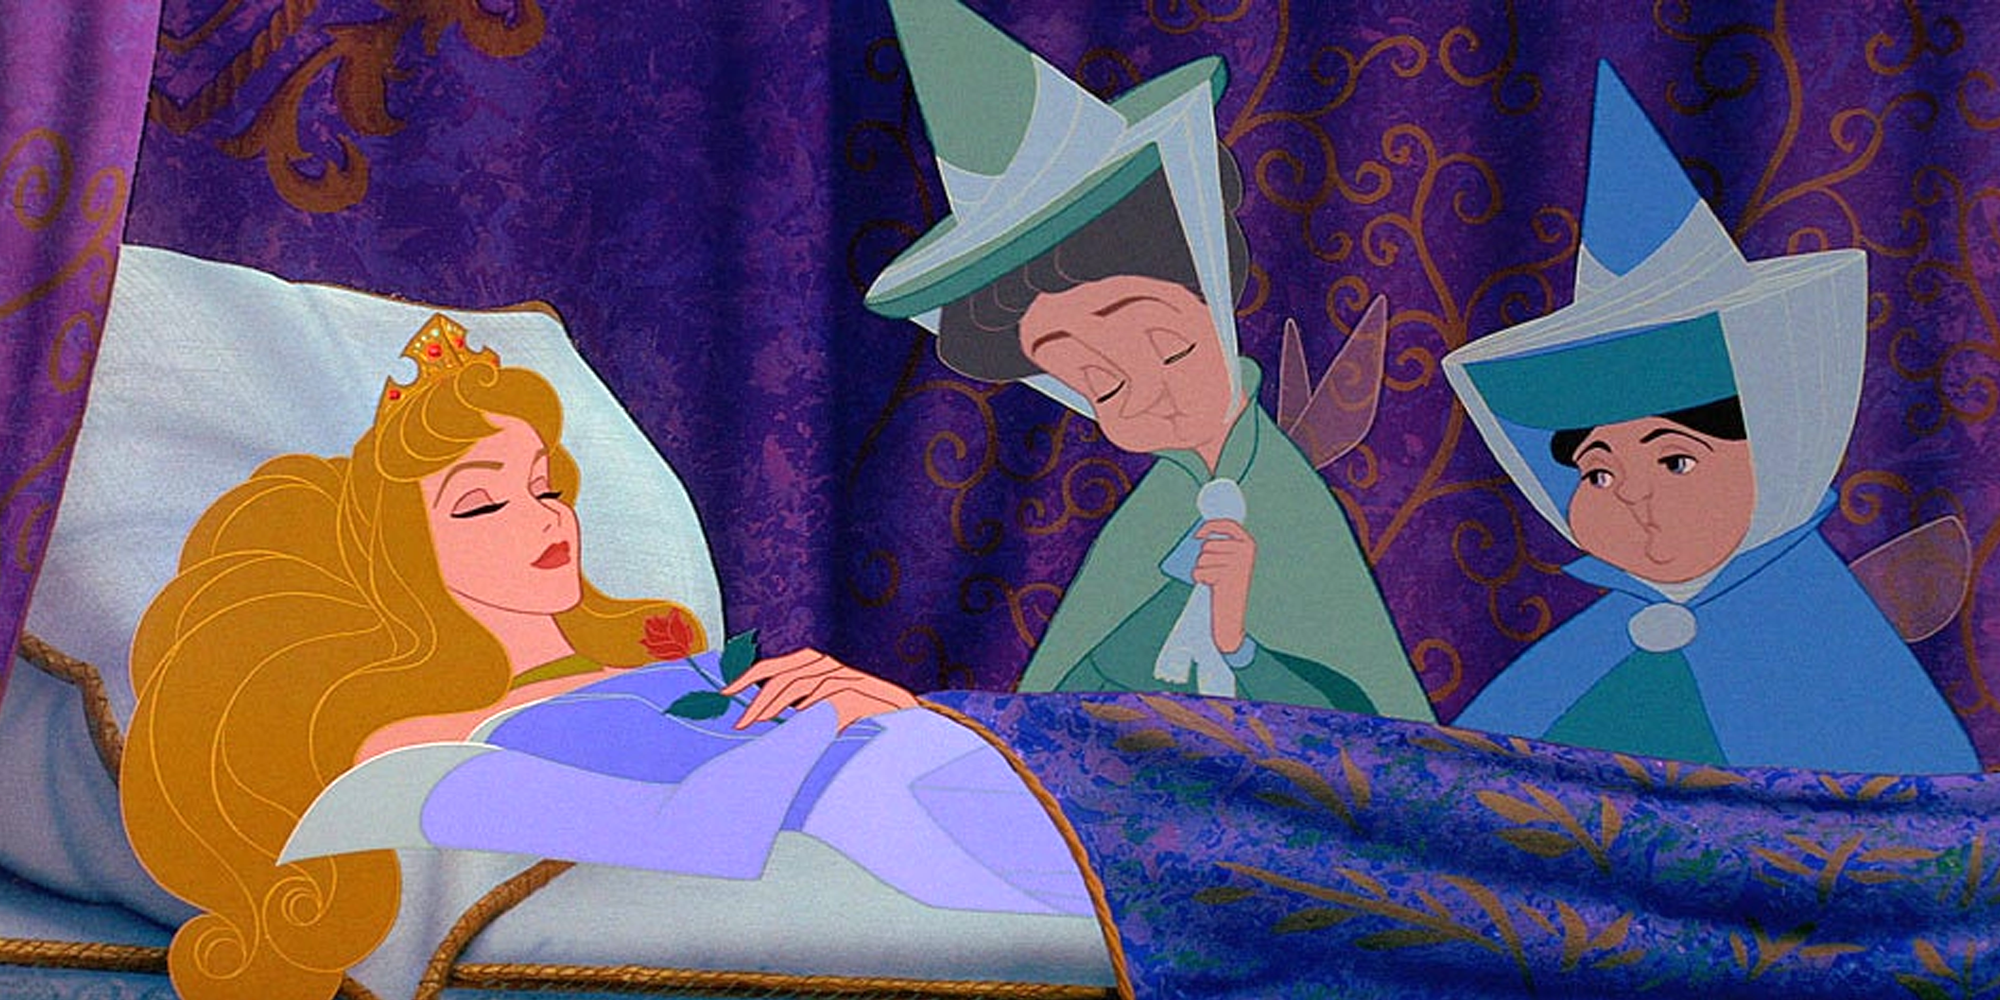 Sleeping Beauty Horror Retelling In The Works – Gory Title & Story Details Revealed